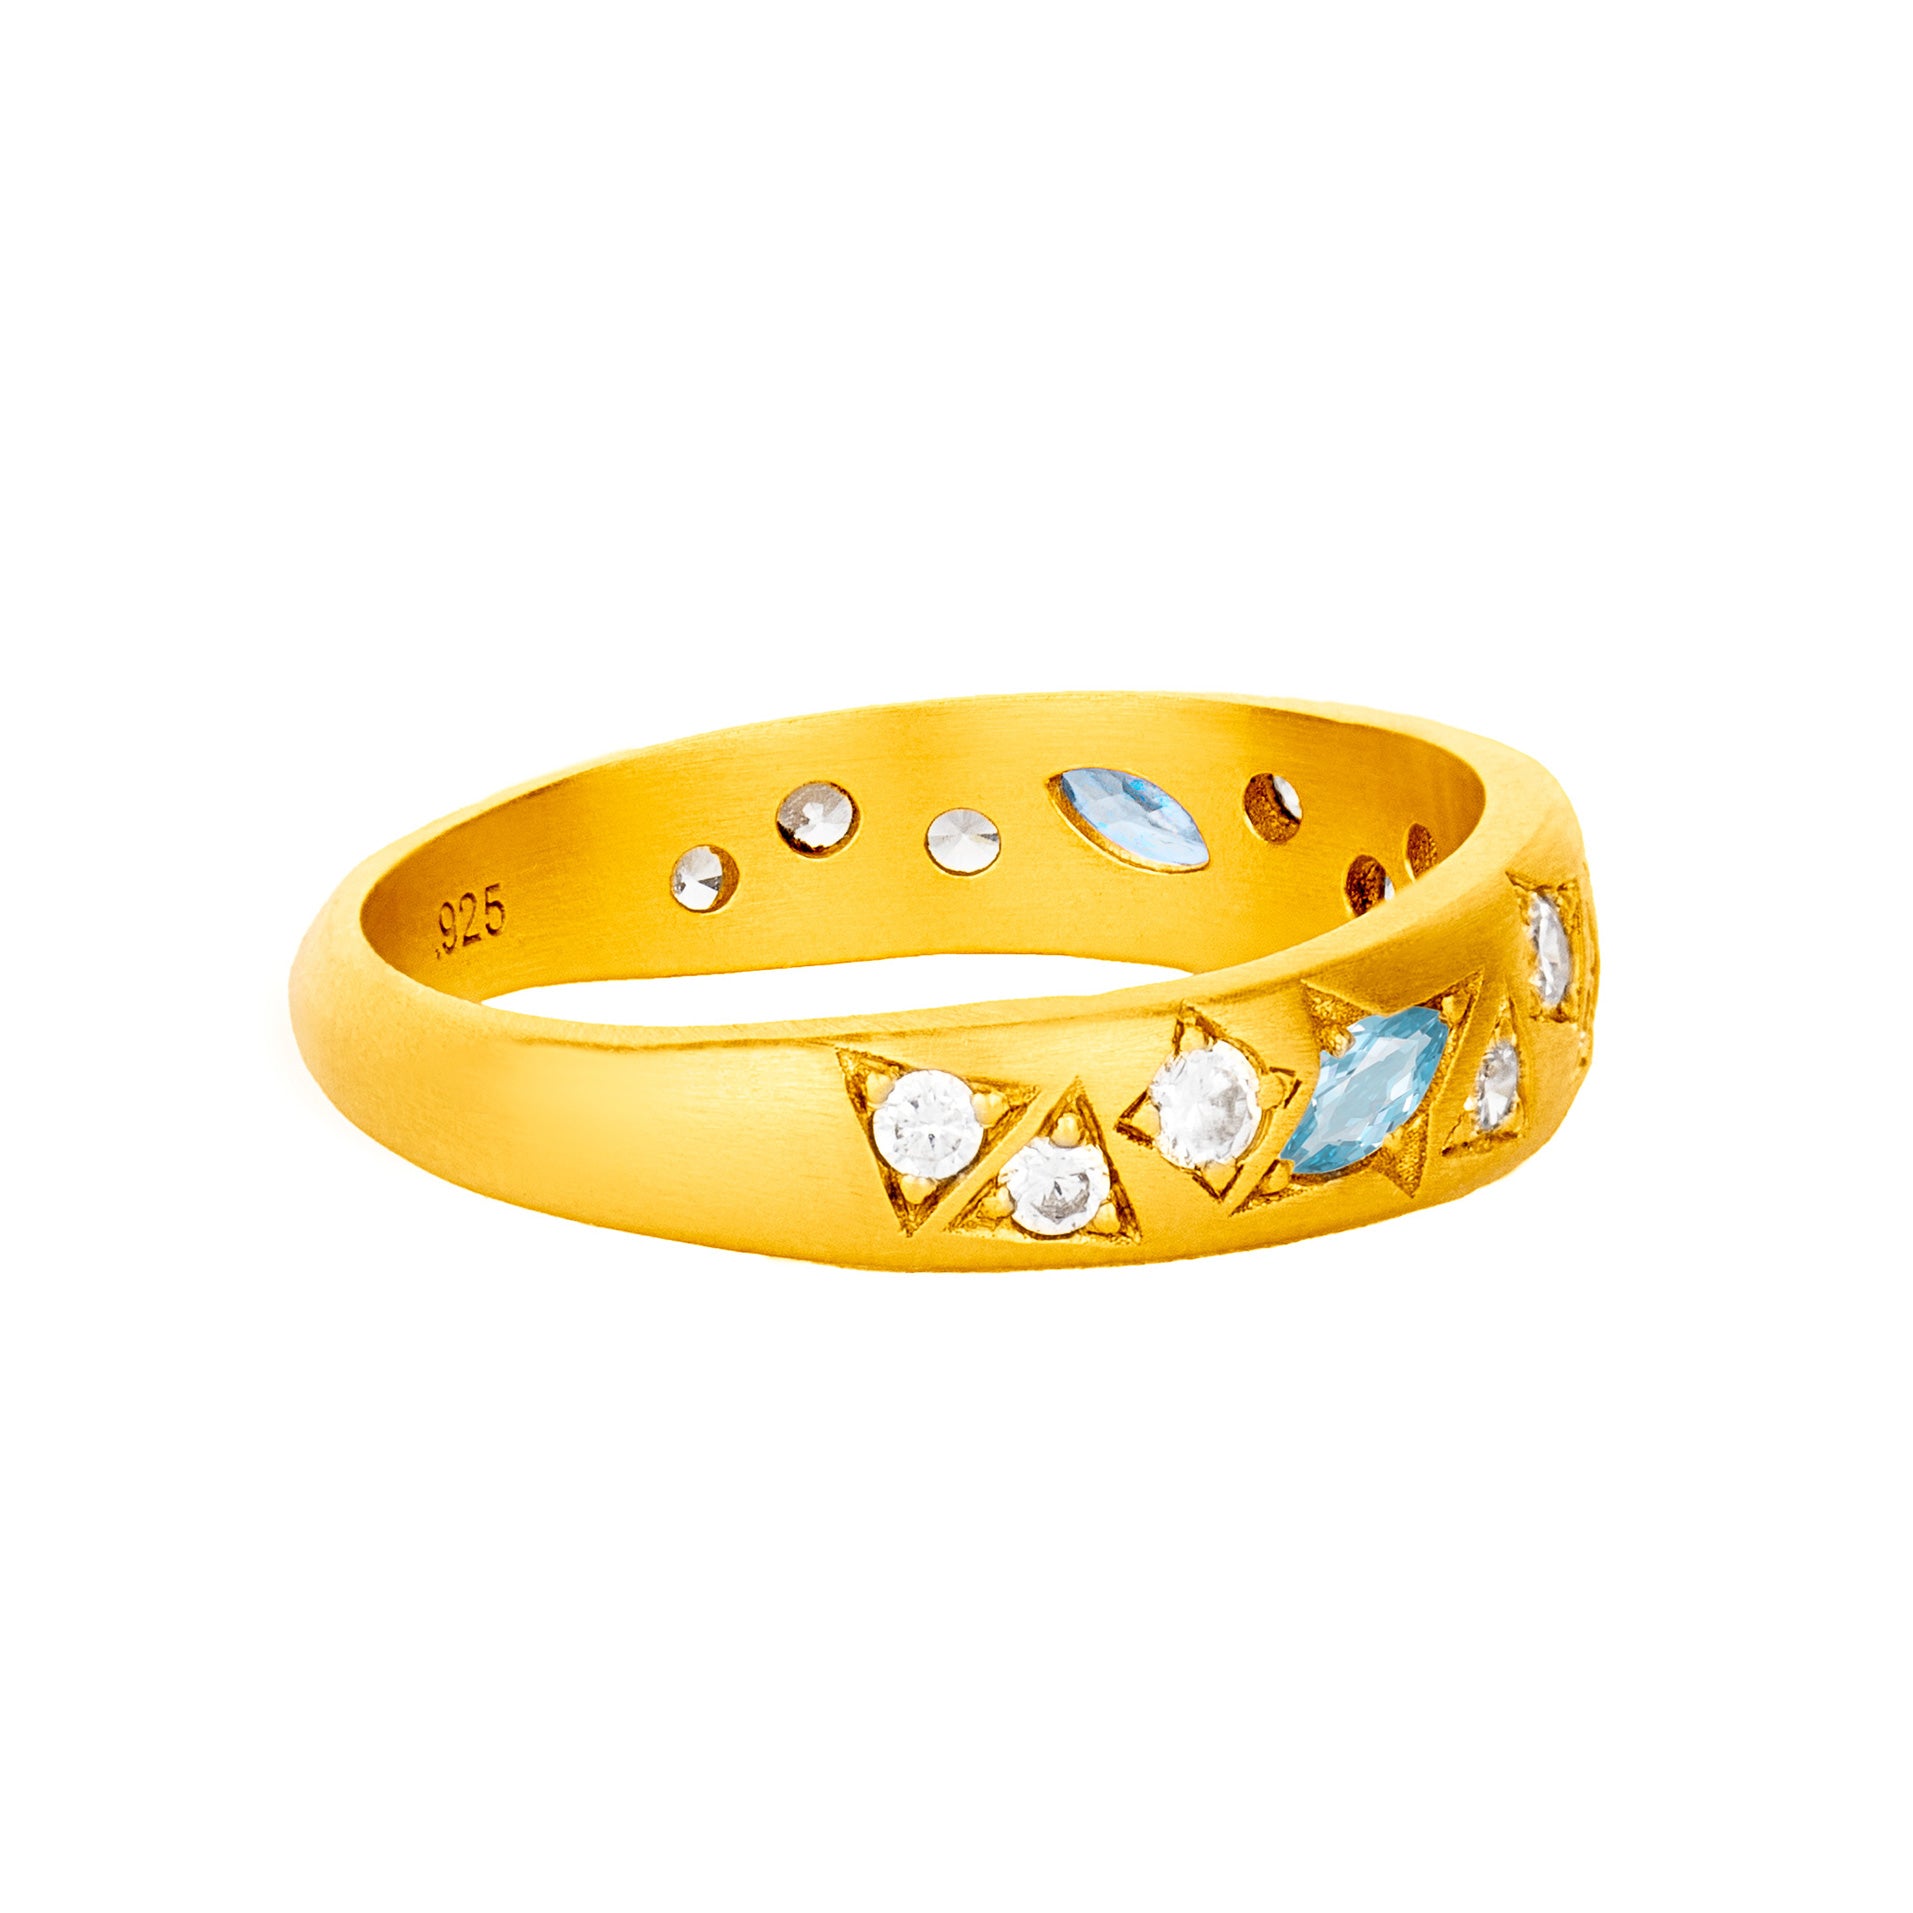 The March Birthstone Ring